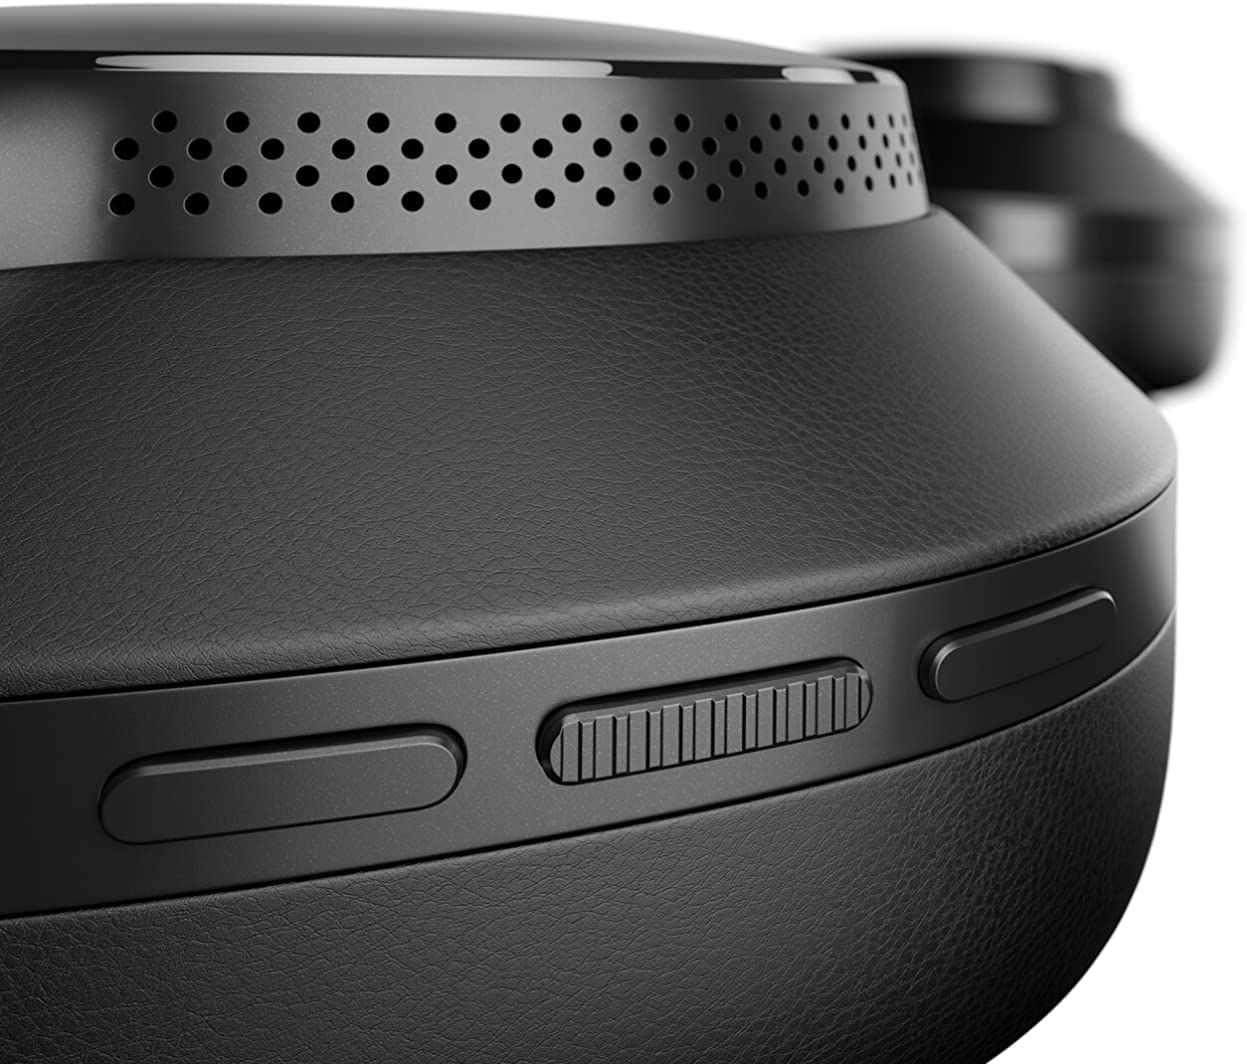 Bowers & Wilkins PX8 ANC Wireless Over-Ear Headphones